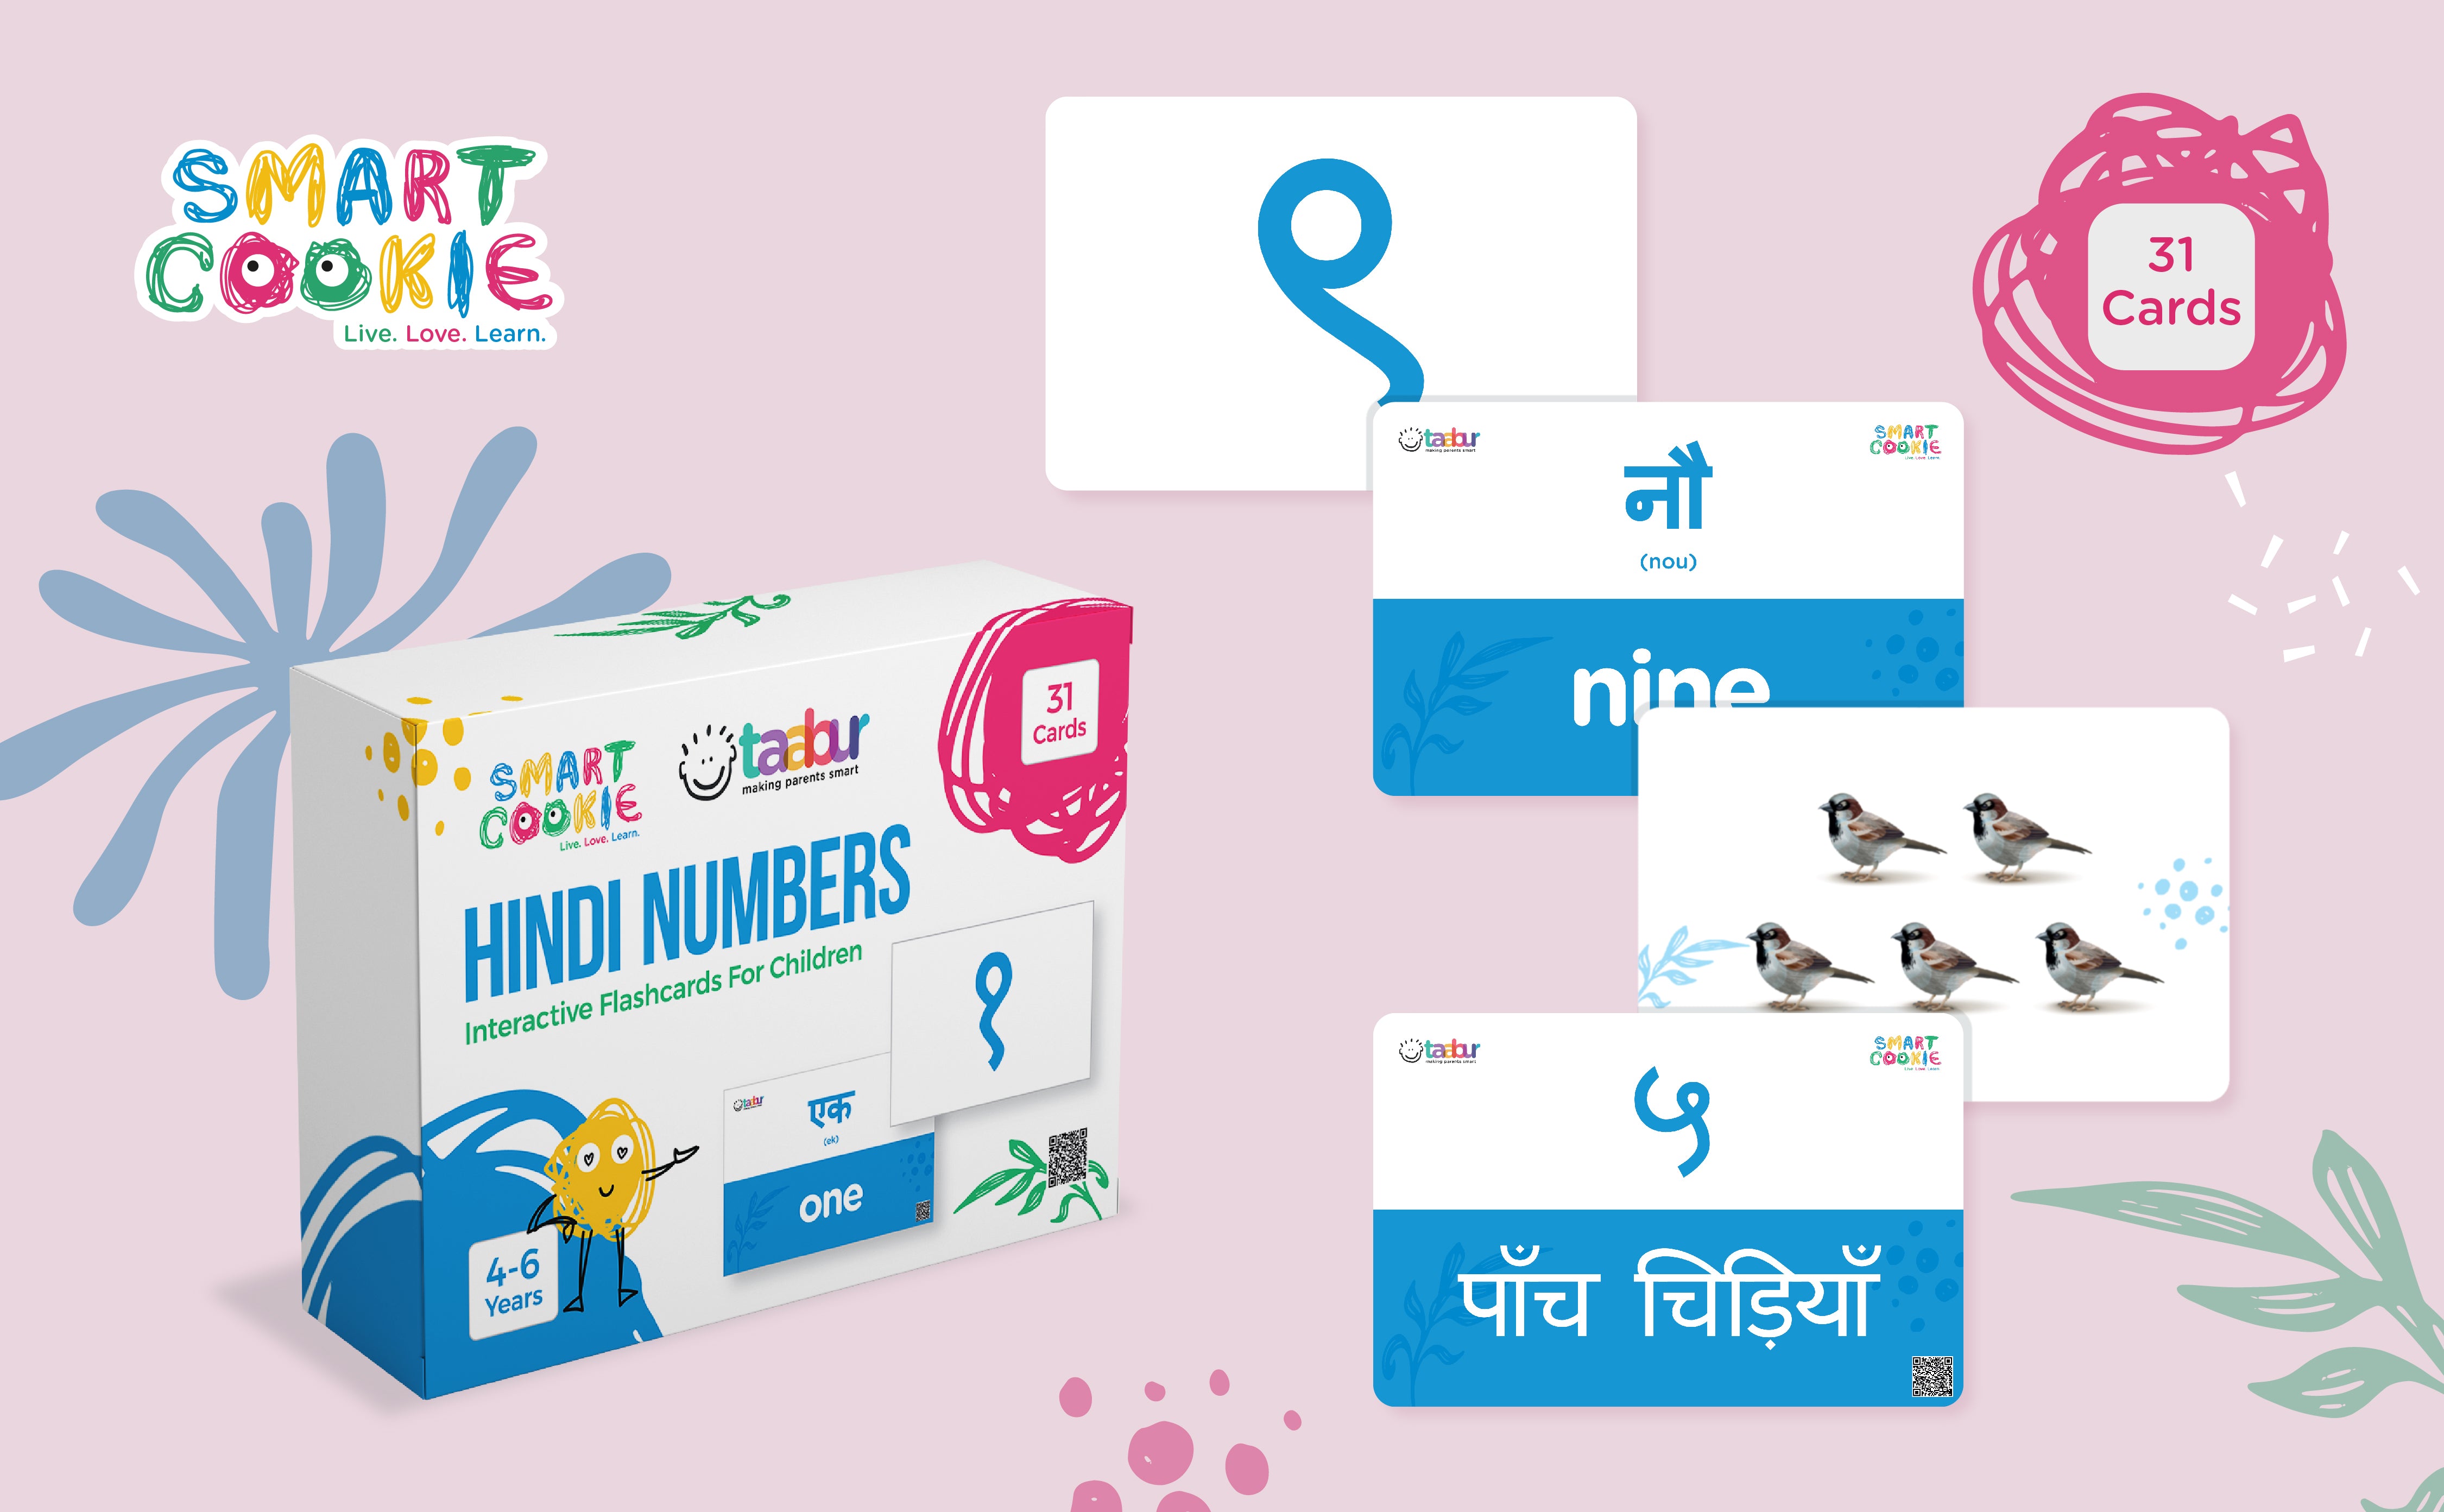 Hindi Numbers + Bonus Couting Cards - Interactive Flashcards for Children (31 Cards) - for Kids Aged 4 to 6 Years Old